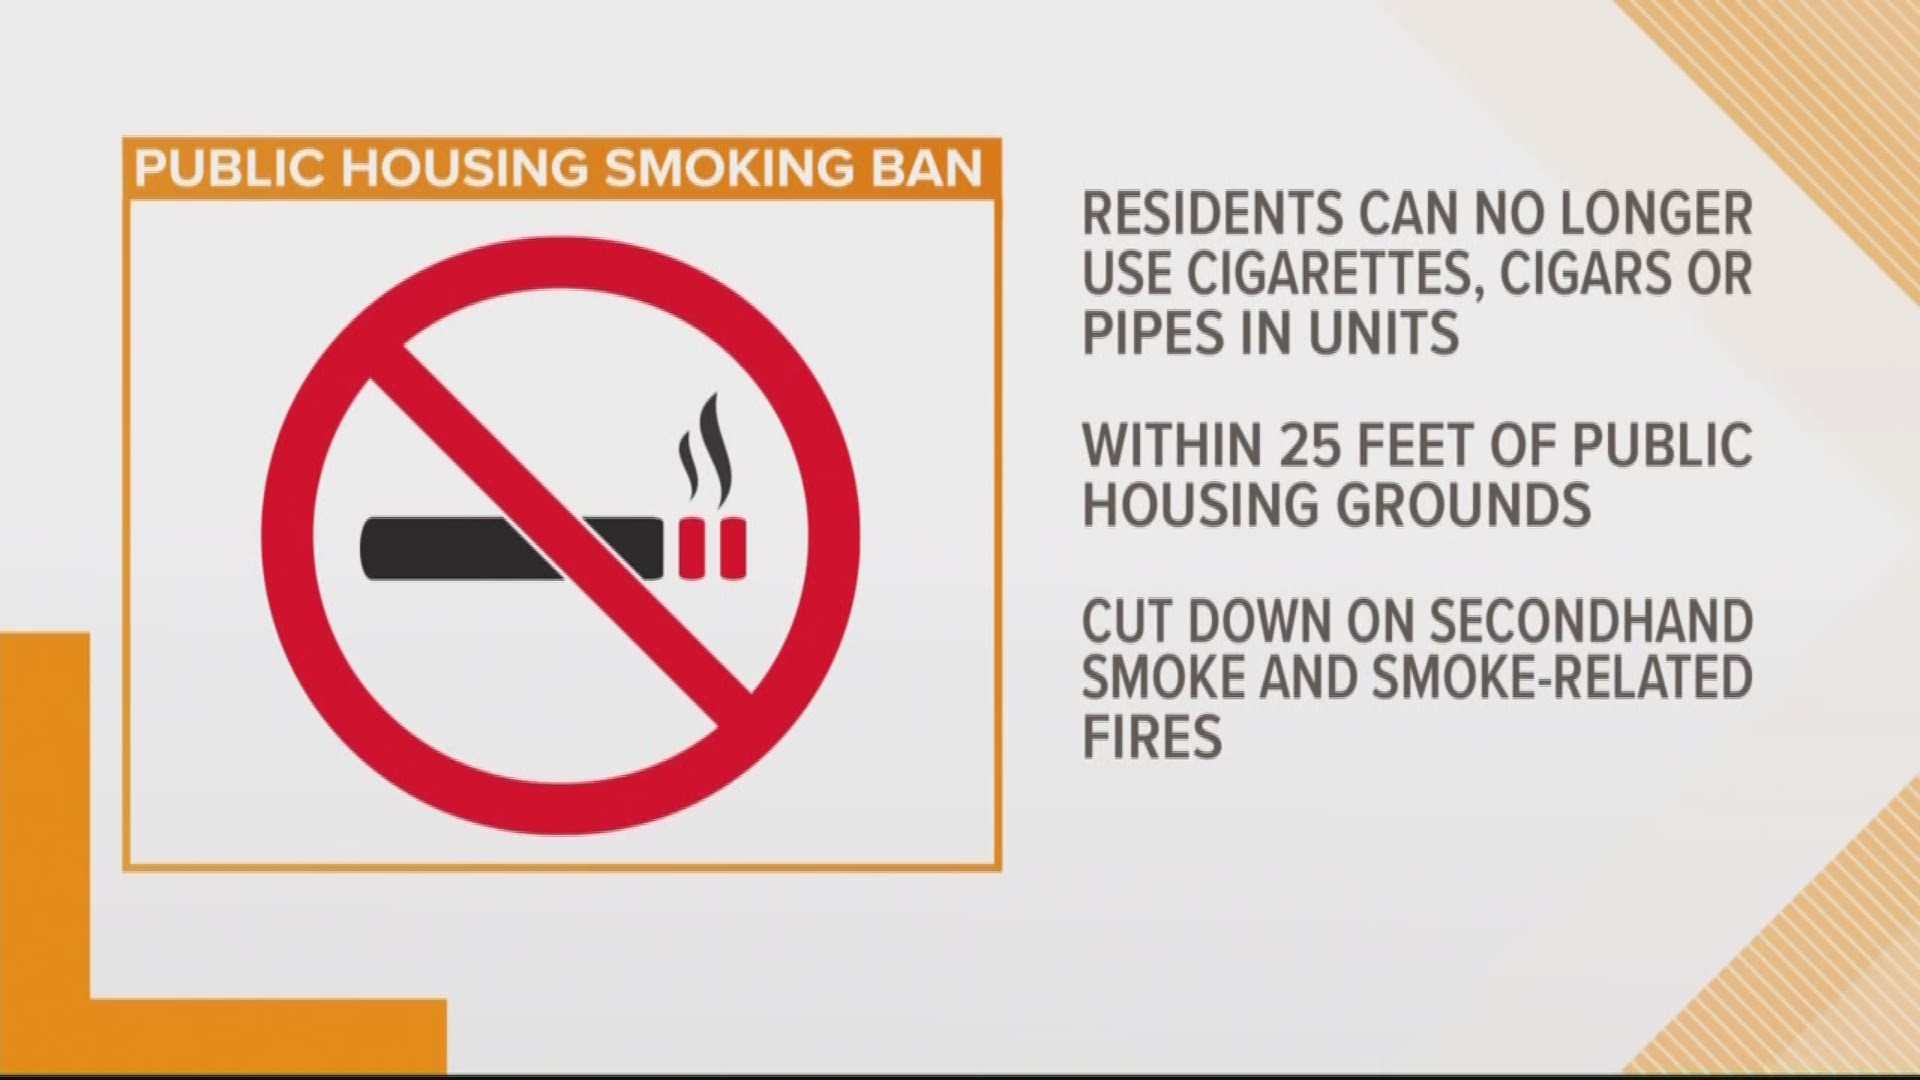 Video Smoking Ban For Public Housing To Go Into Effect Tuesday